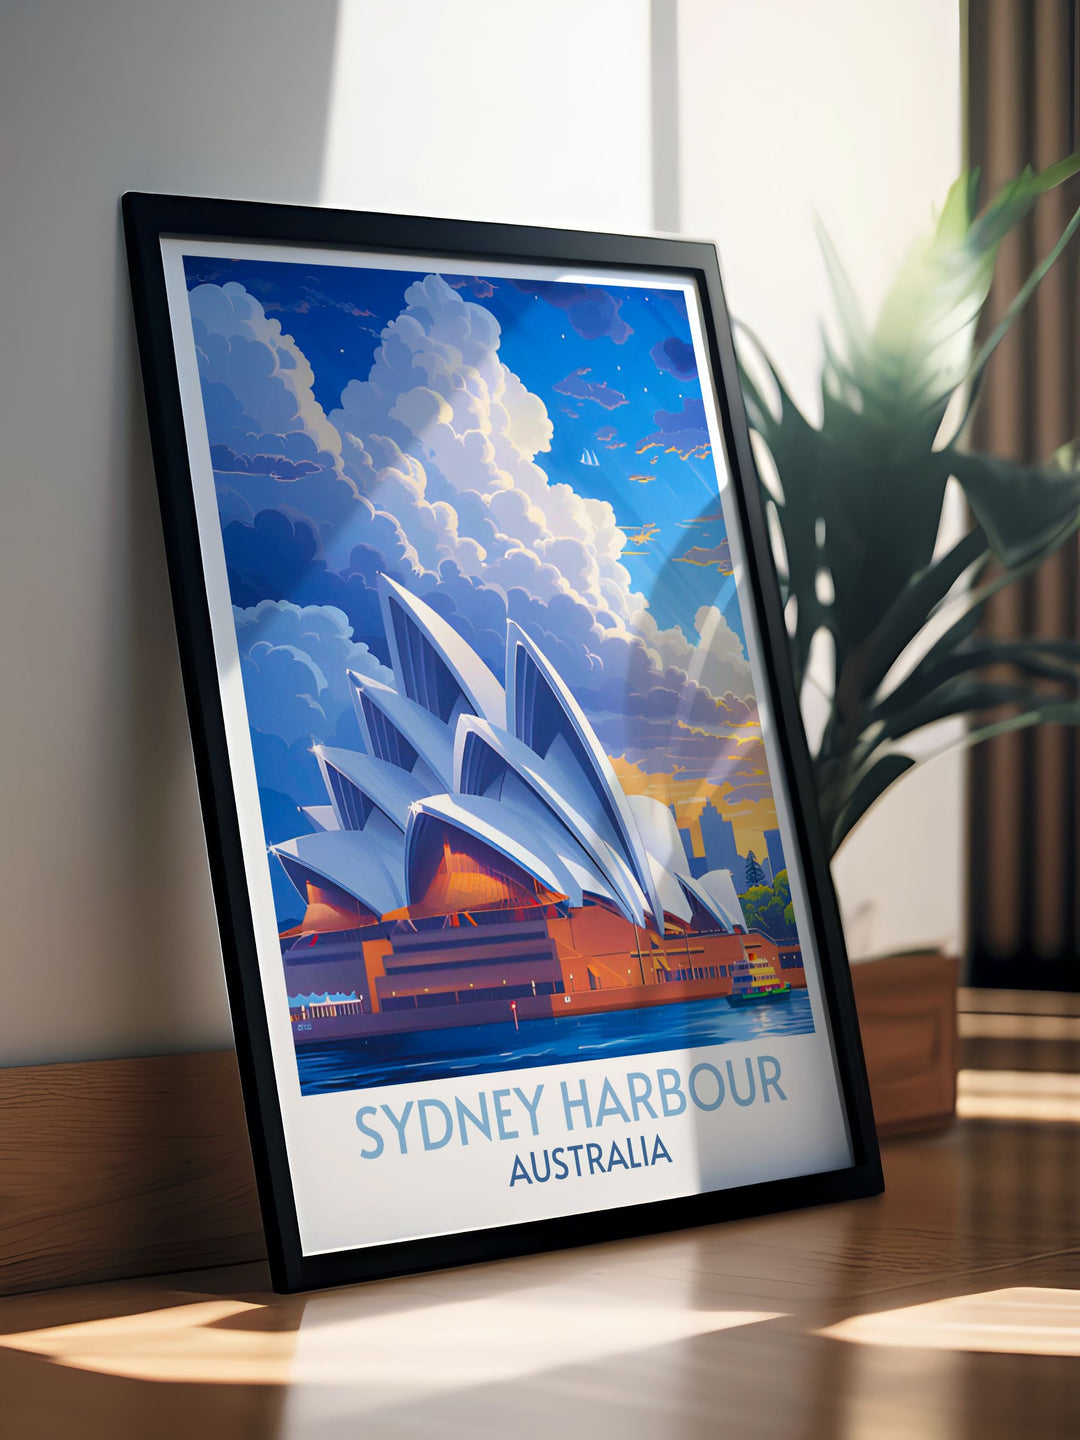 Artistic representation of the Sydney Opera House in a detailed and vibrant poster, showcasing the architectural wonder in all its glory, ideal for enhancing your space with cultural artwork and cityscape elegance.